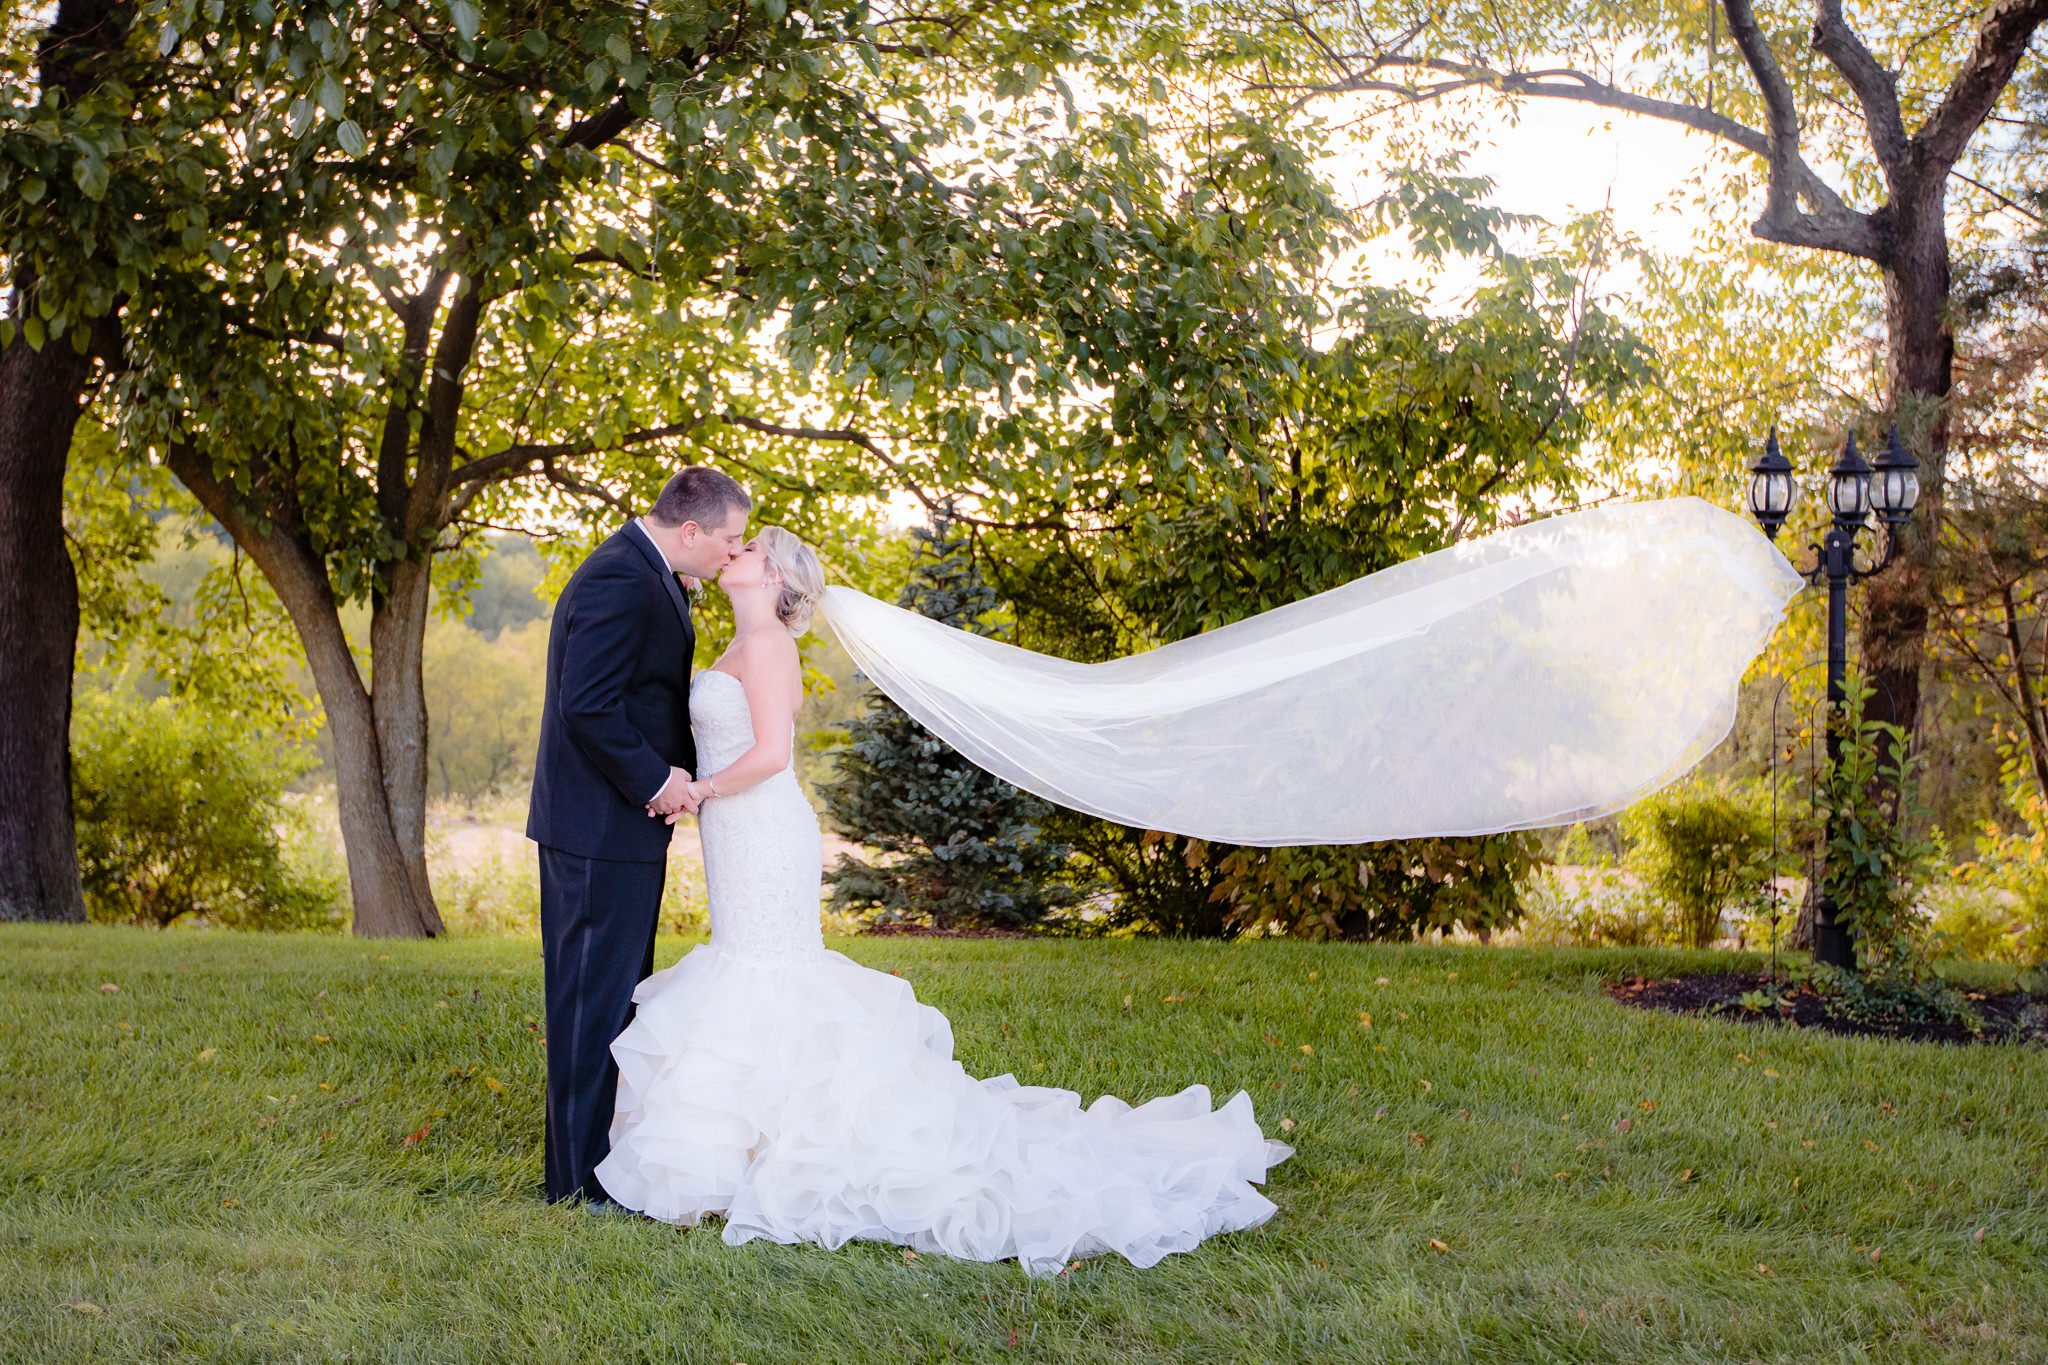 Groom kisses bride as her cathedral veil blows in the wind at Greystone Fields